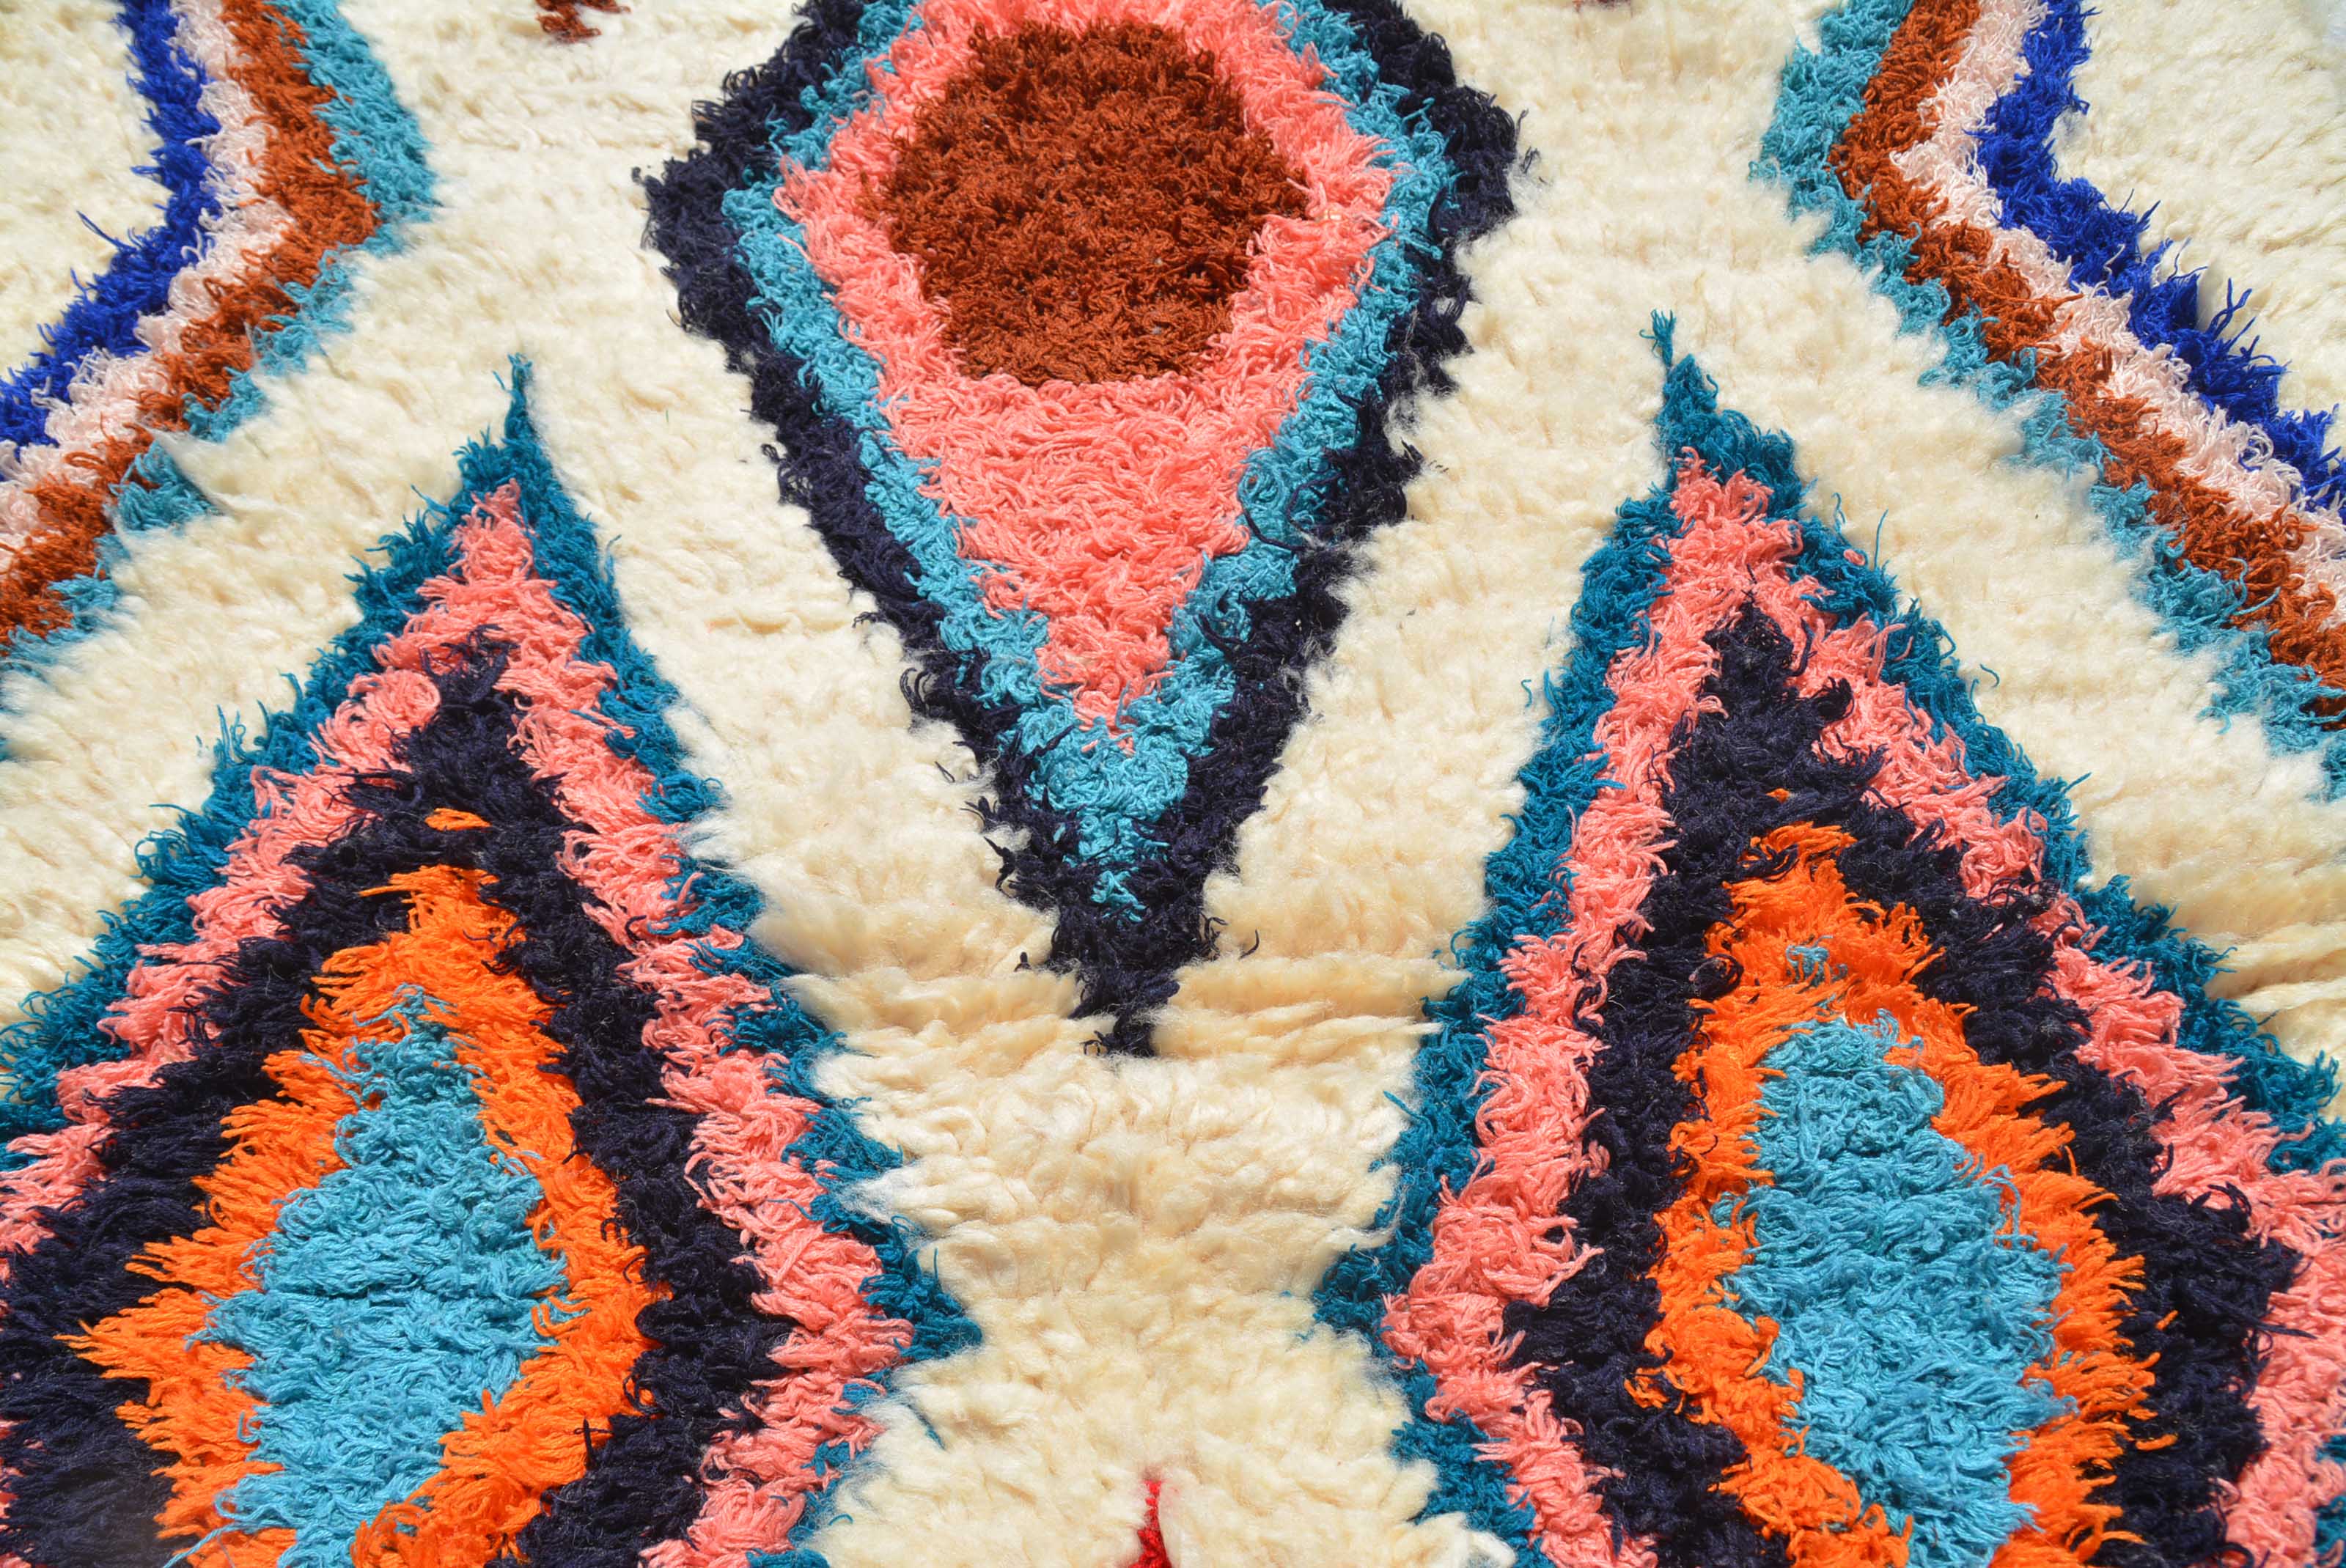 Vintage Moroccan Rug Vintage Moroccan Rug  - Vintage Hooked Rugs - Vintage Inspired Rugs illuminate collective 